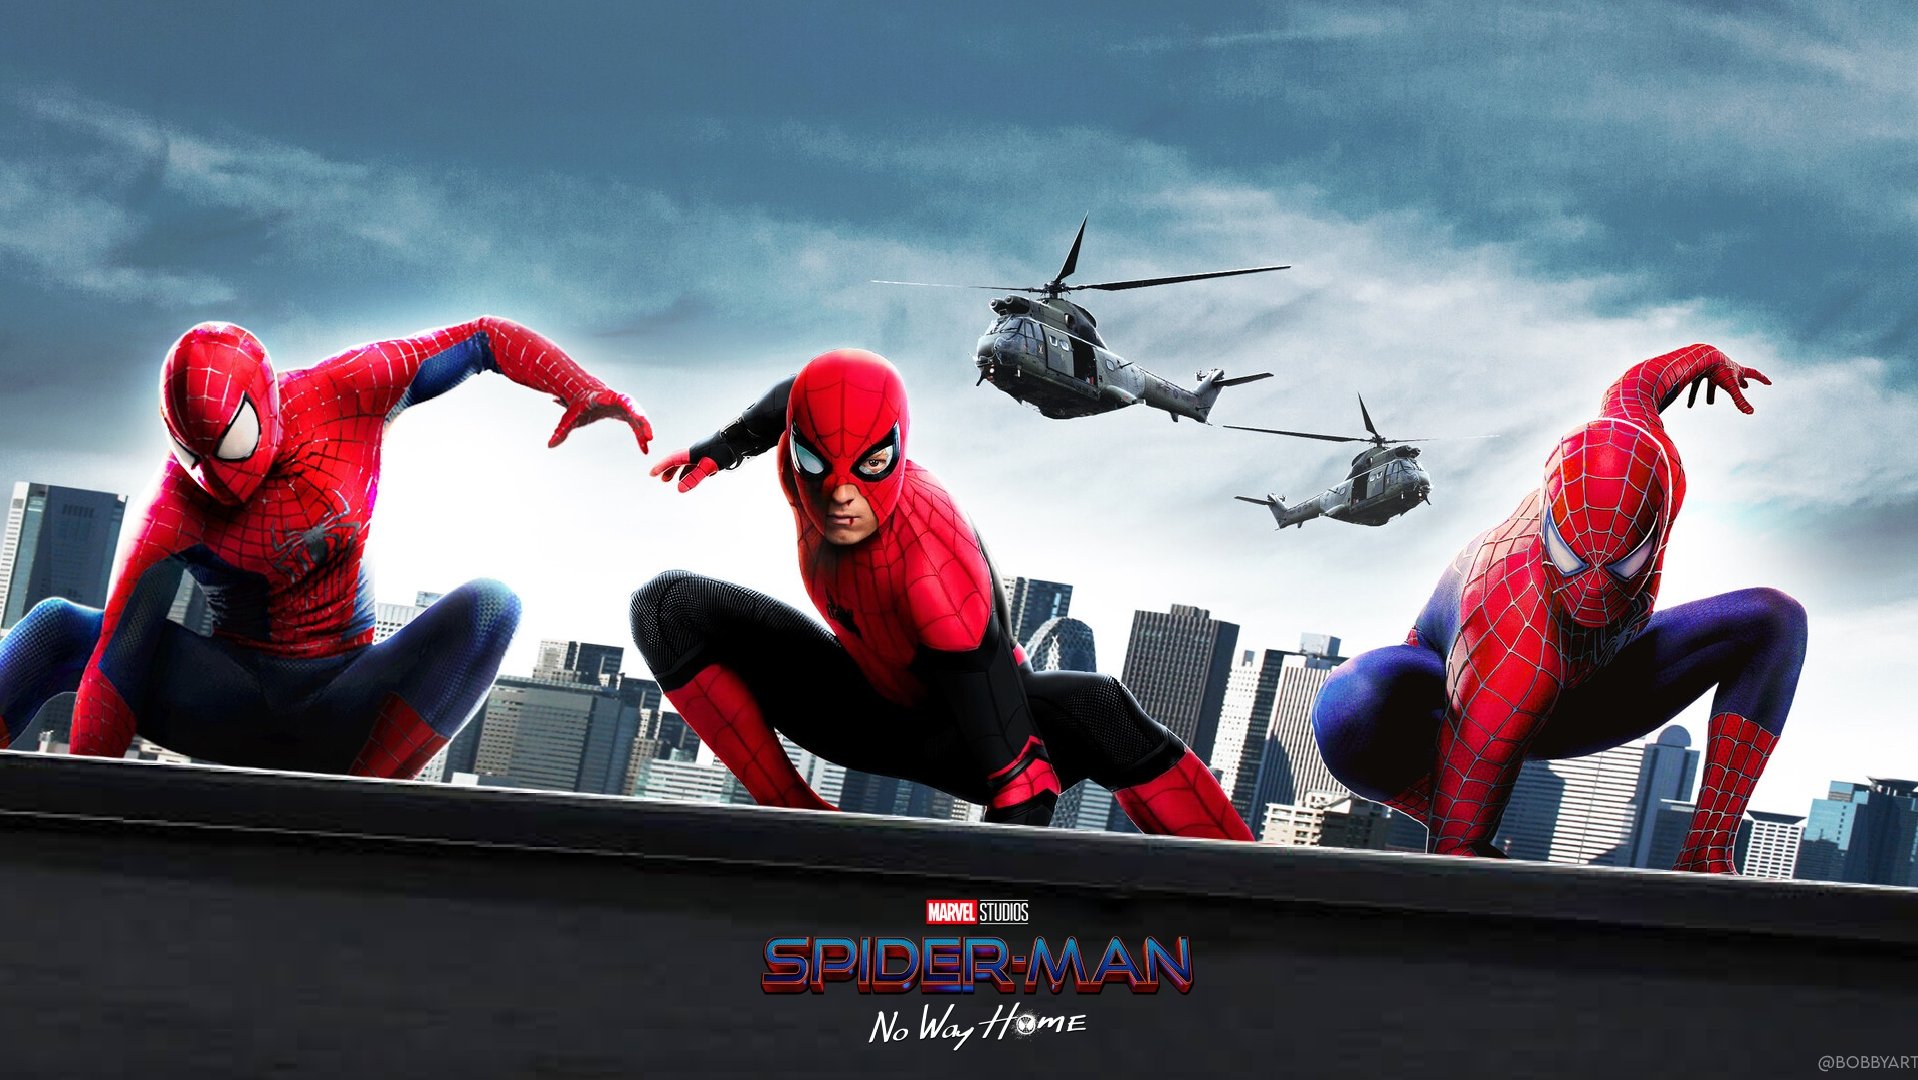 Everything Spider Man News Wants Tobey Maguire, Andrew Garfield And Tom Holland To Unite Again As Soon As Possible. #SpiderManNoWayHome (Source